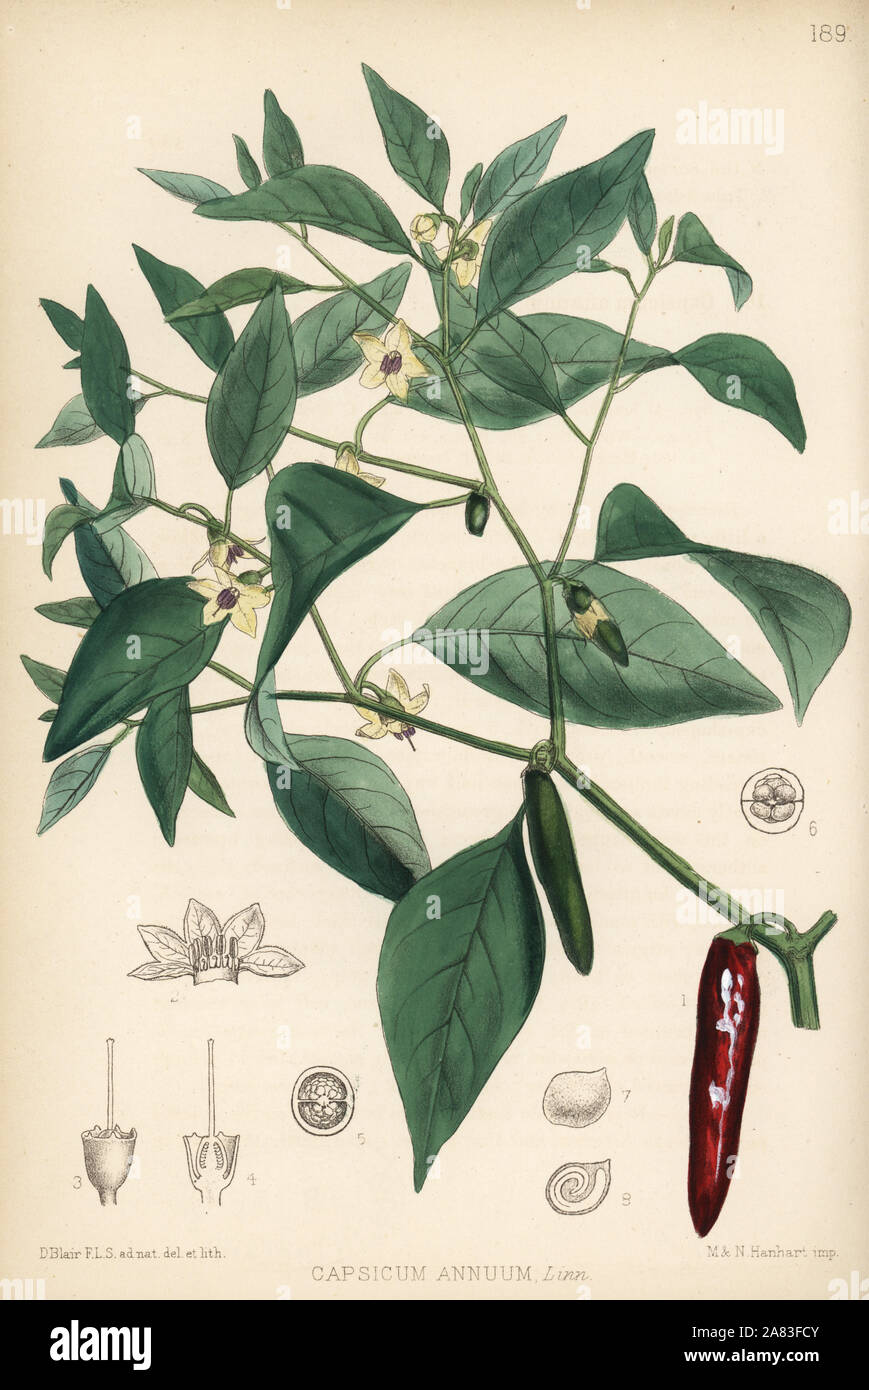 Chili pepper or pod pepper, Capsicum annuum. Handcoloured lithograph by Hanhart after a botanical illustration by David Blair from Robert Bentley and Henry Trimen's Medicinal Plants, London, 1880. Stock Photo